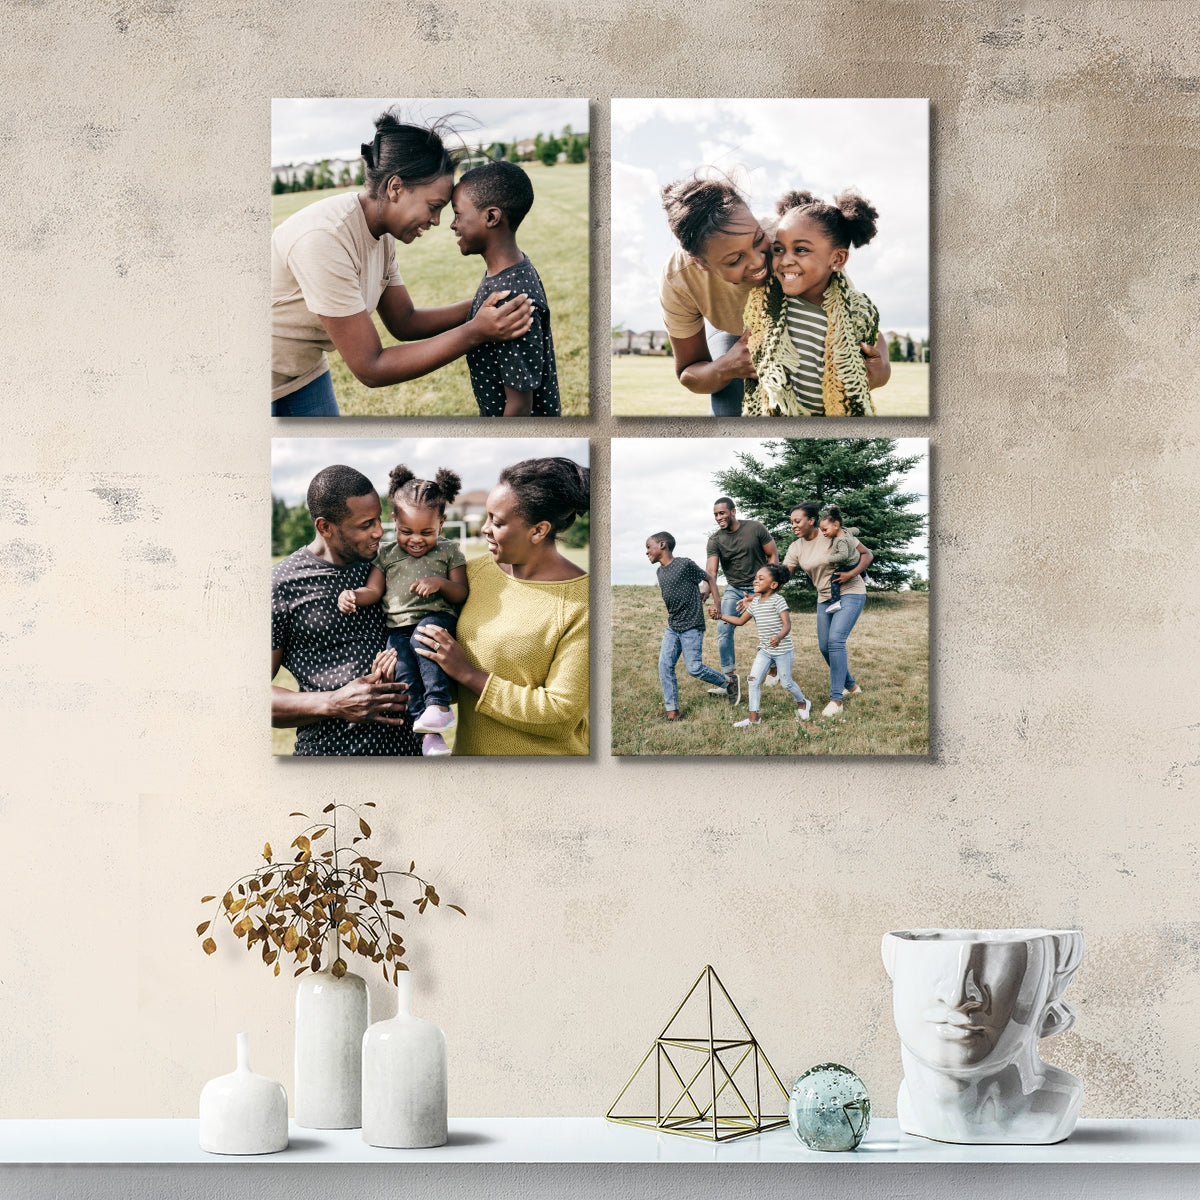 Personalize Your Interior with Custom Photo Tiles